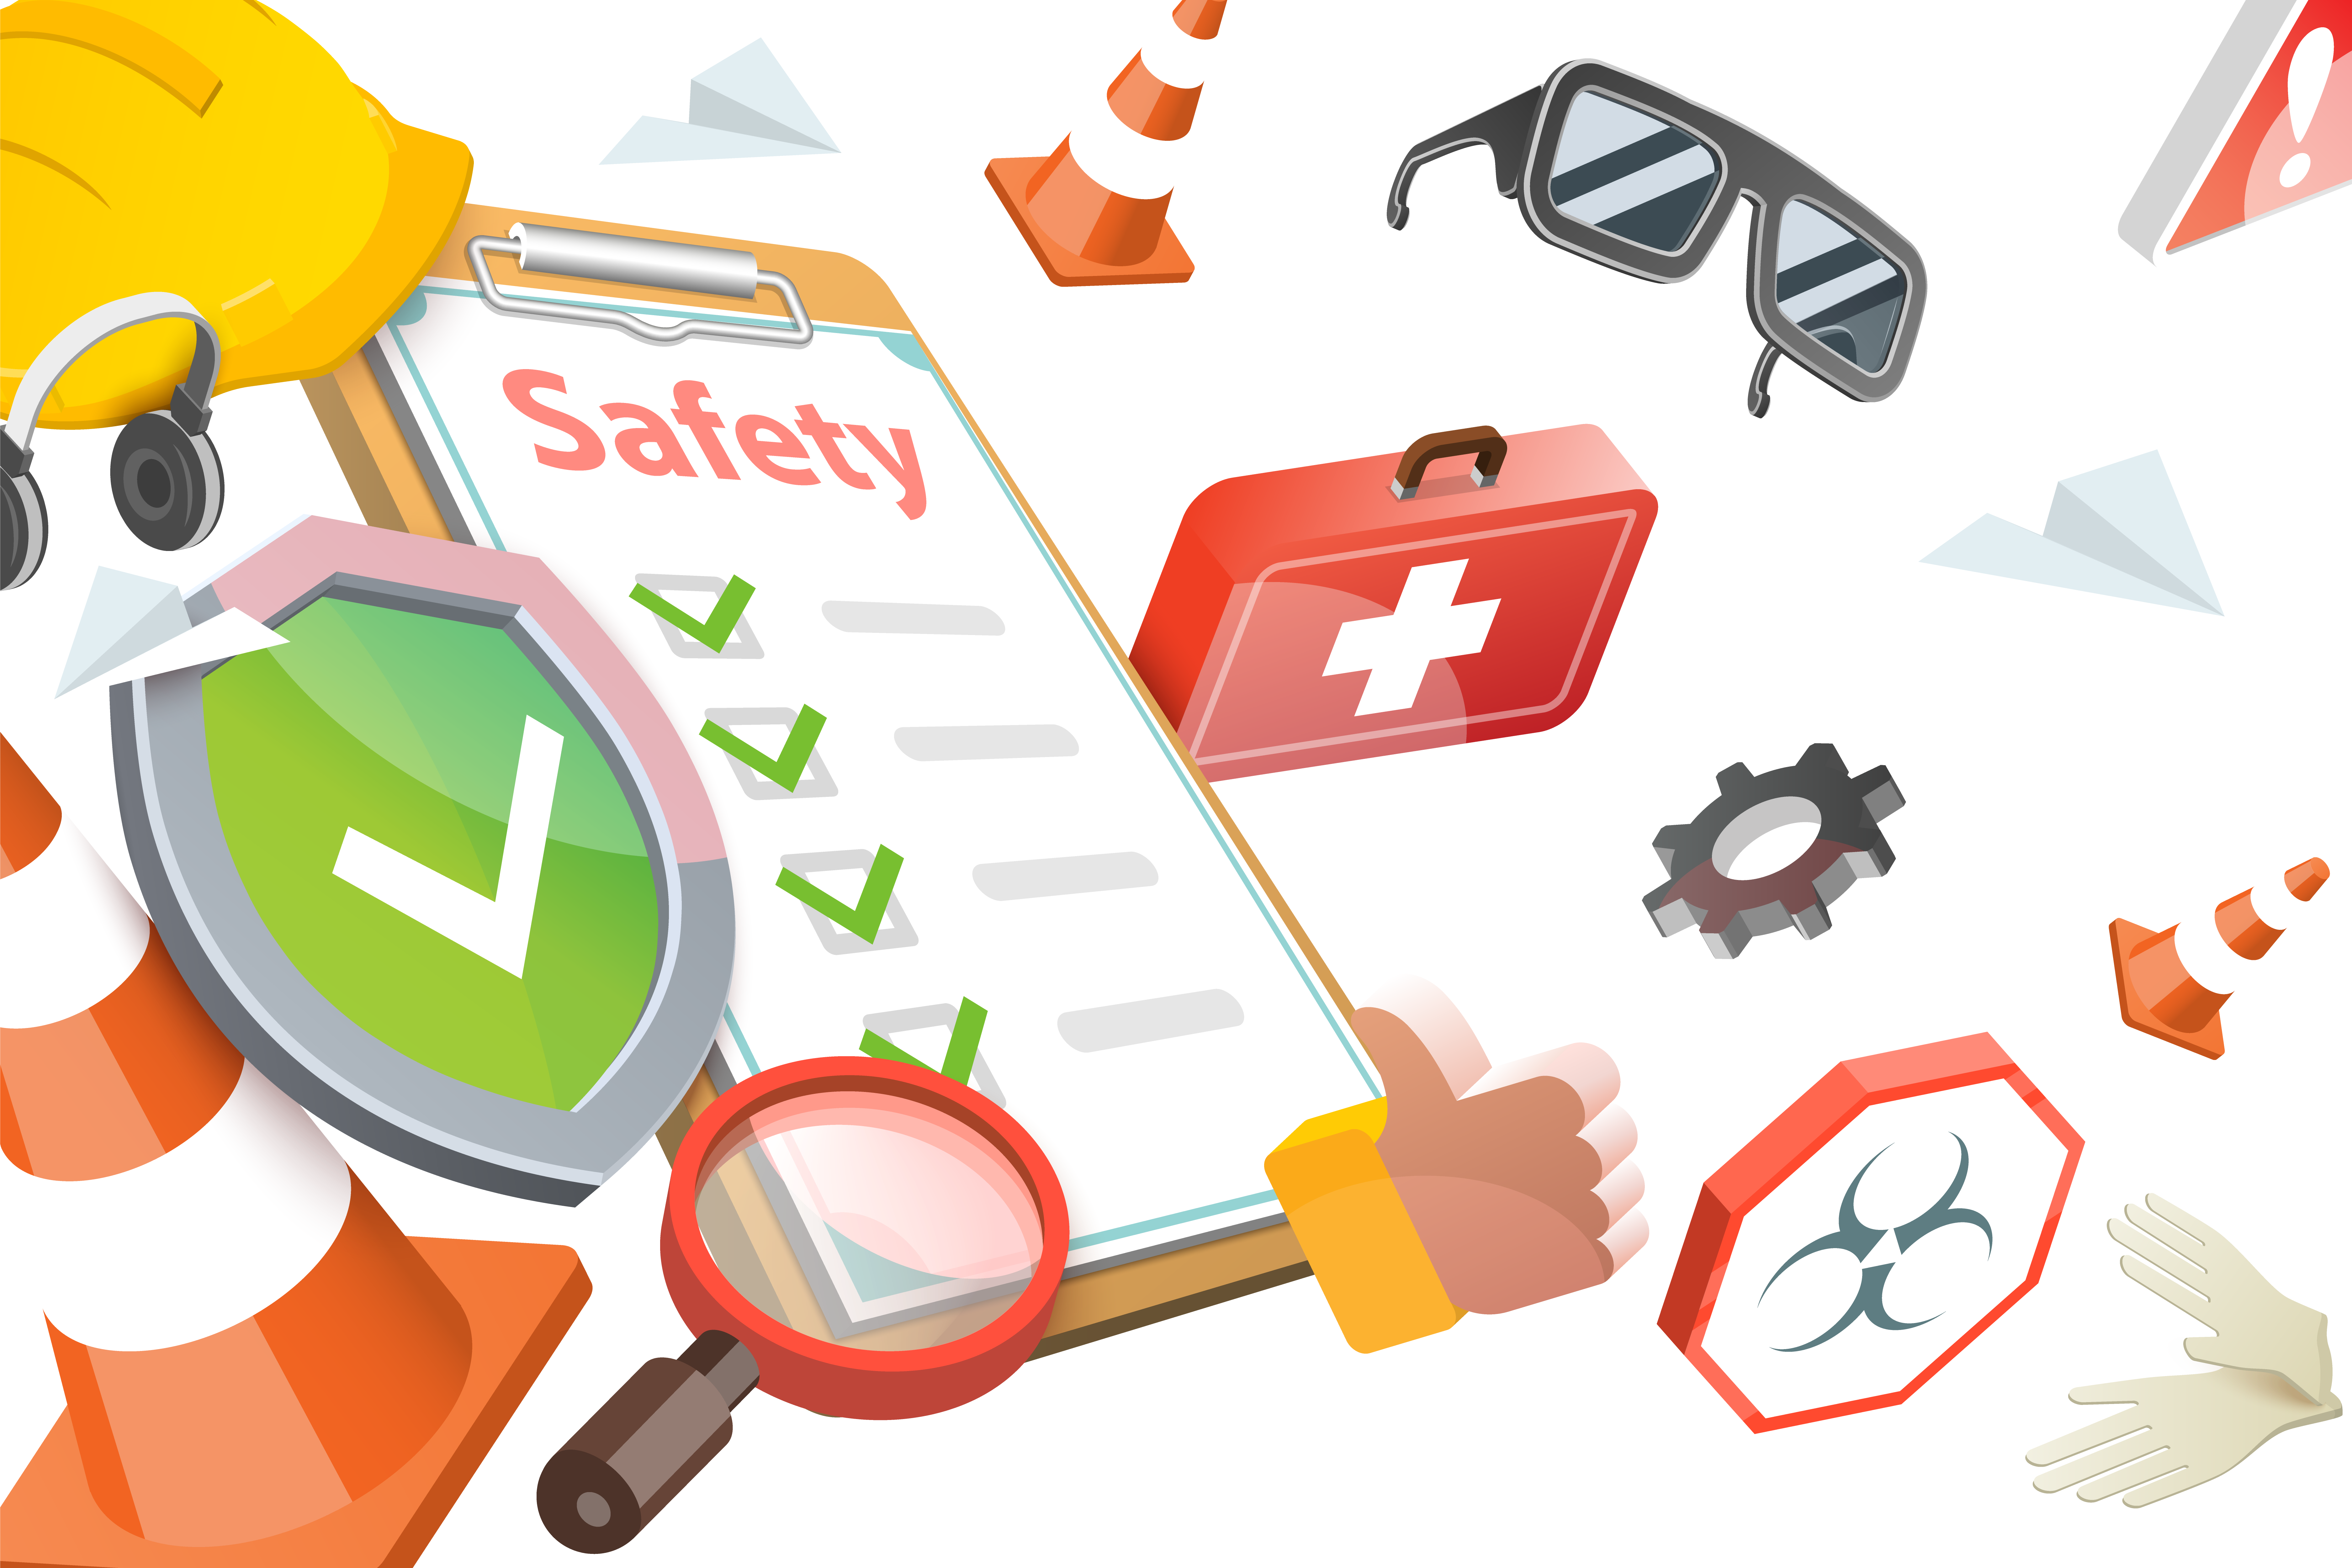 Enhancing Health and Safety in your Workplace Through eLearning